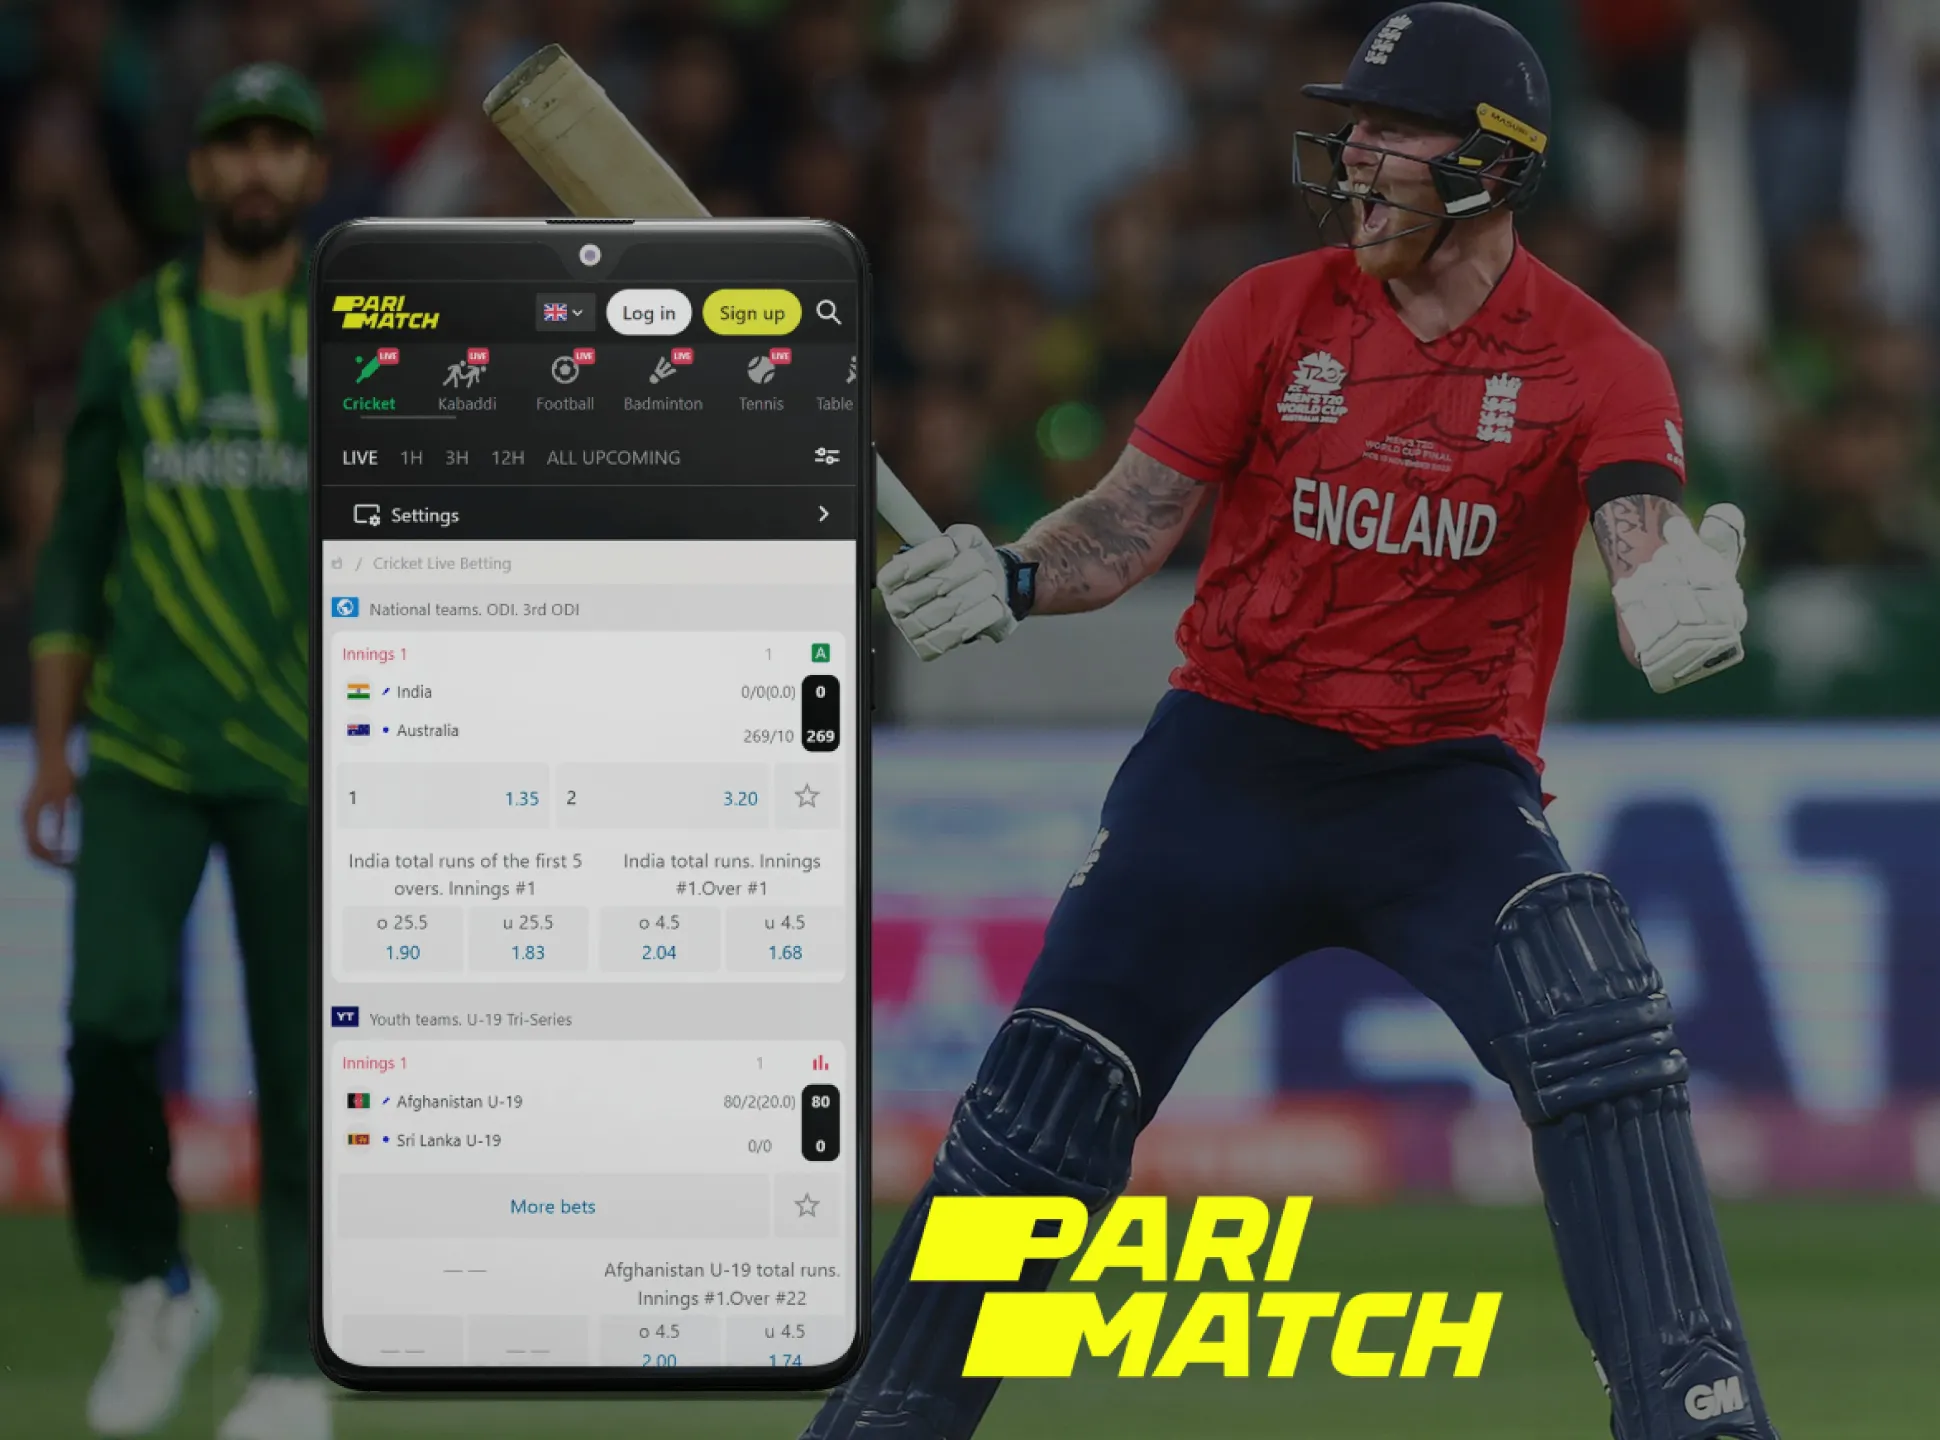 Feel confident in your bets at the secure cricket betting site Parimatch.